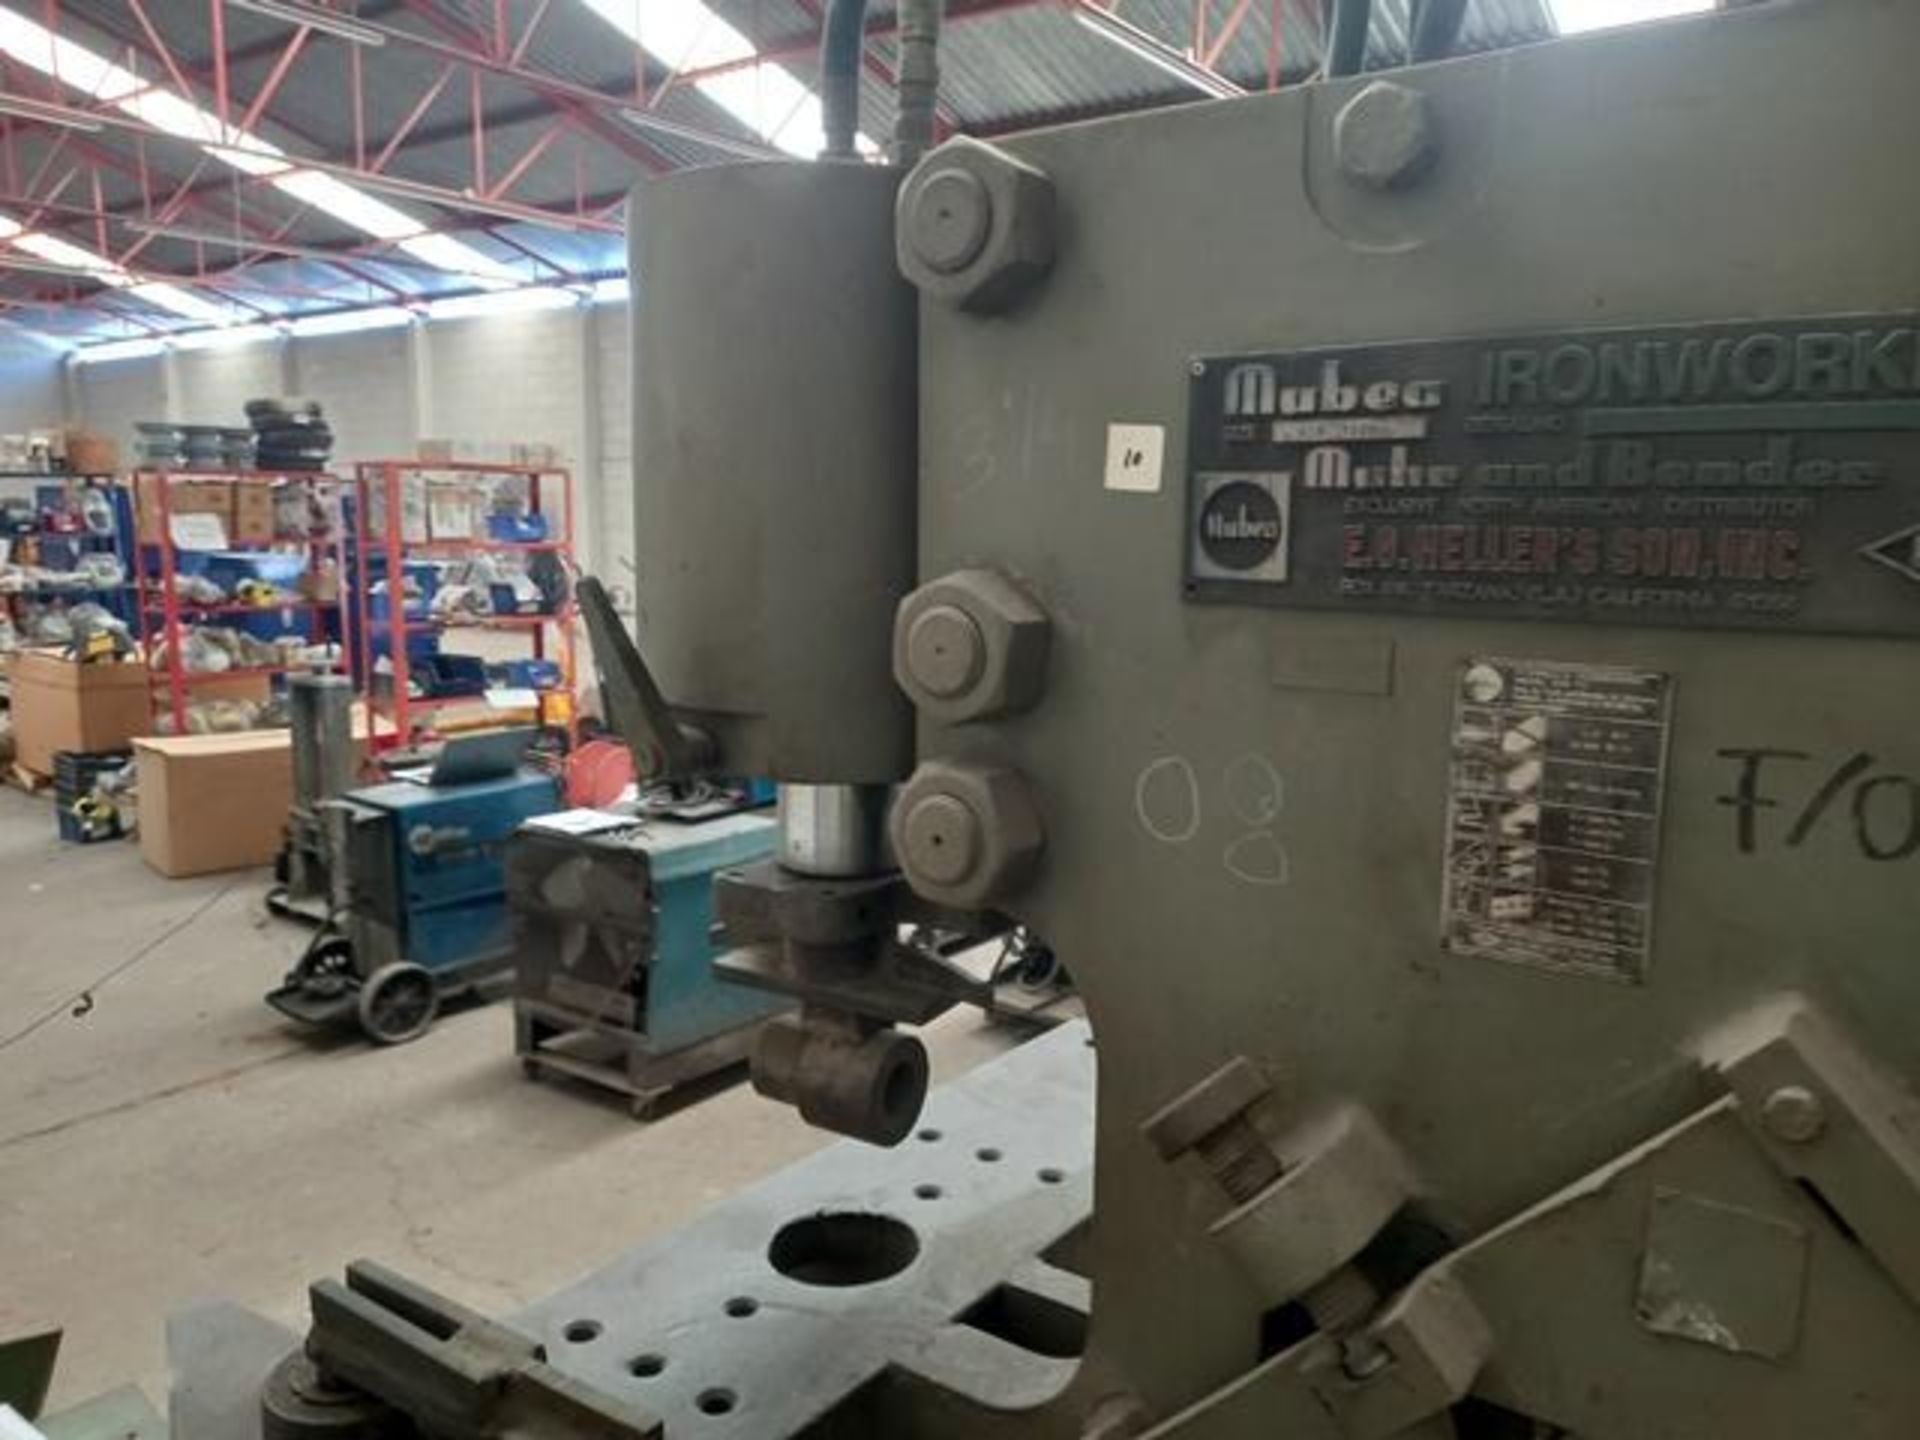 Mubea HIW 1000 Punching Machine, S/N: Illegible: Estimated Punching Capacity of 1000kn for a Maximum - Image 12 of 14